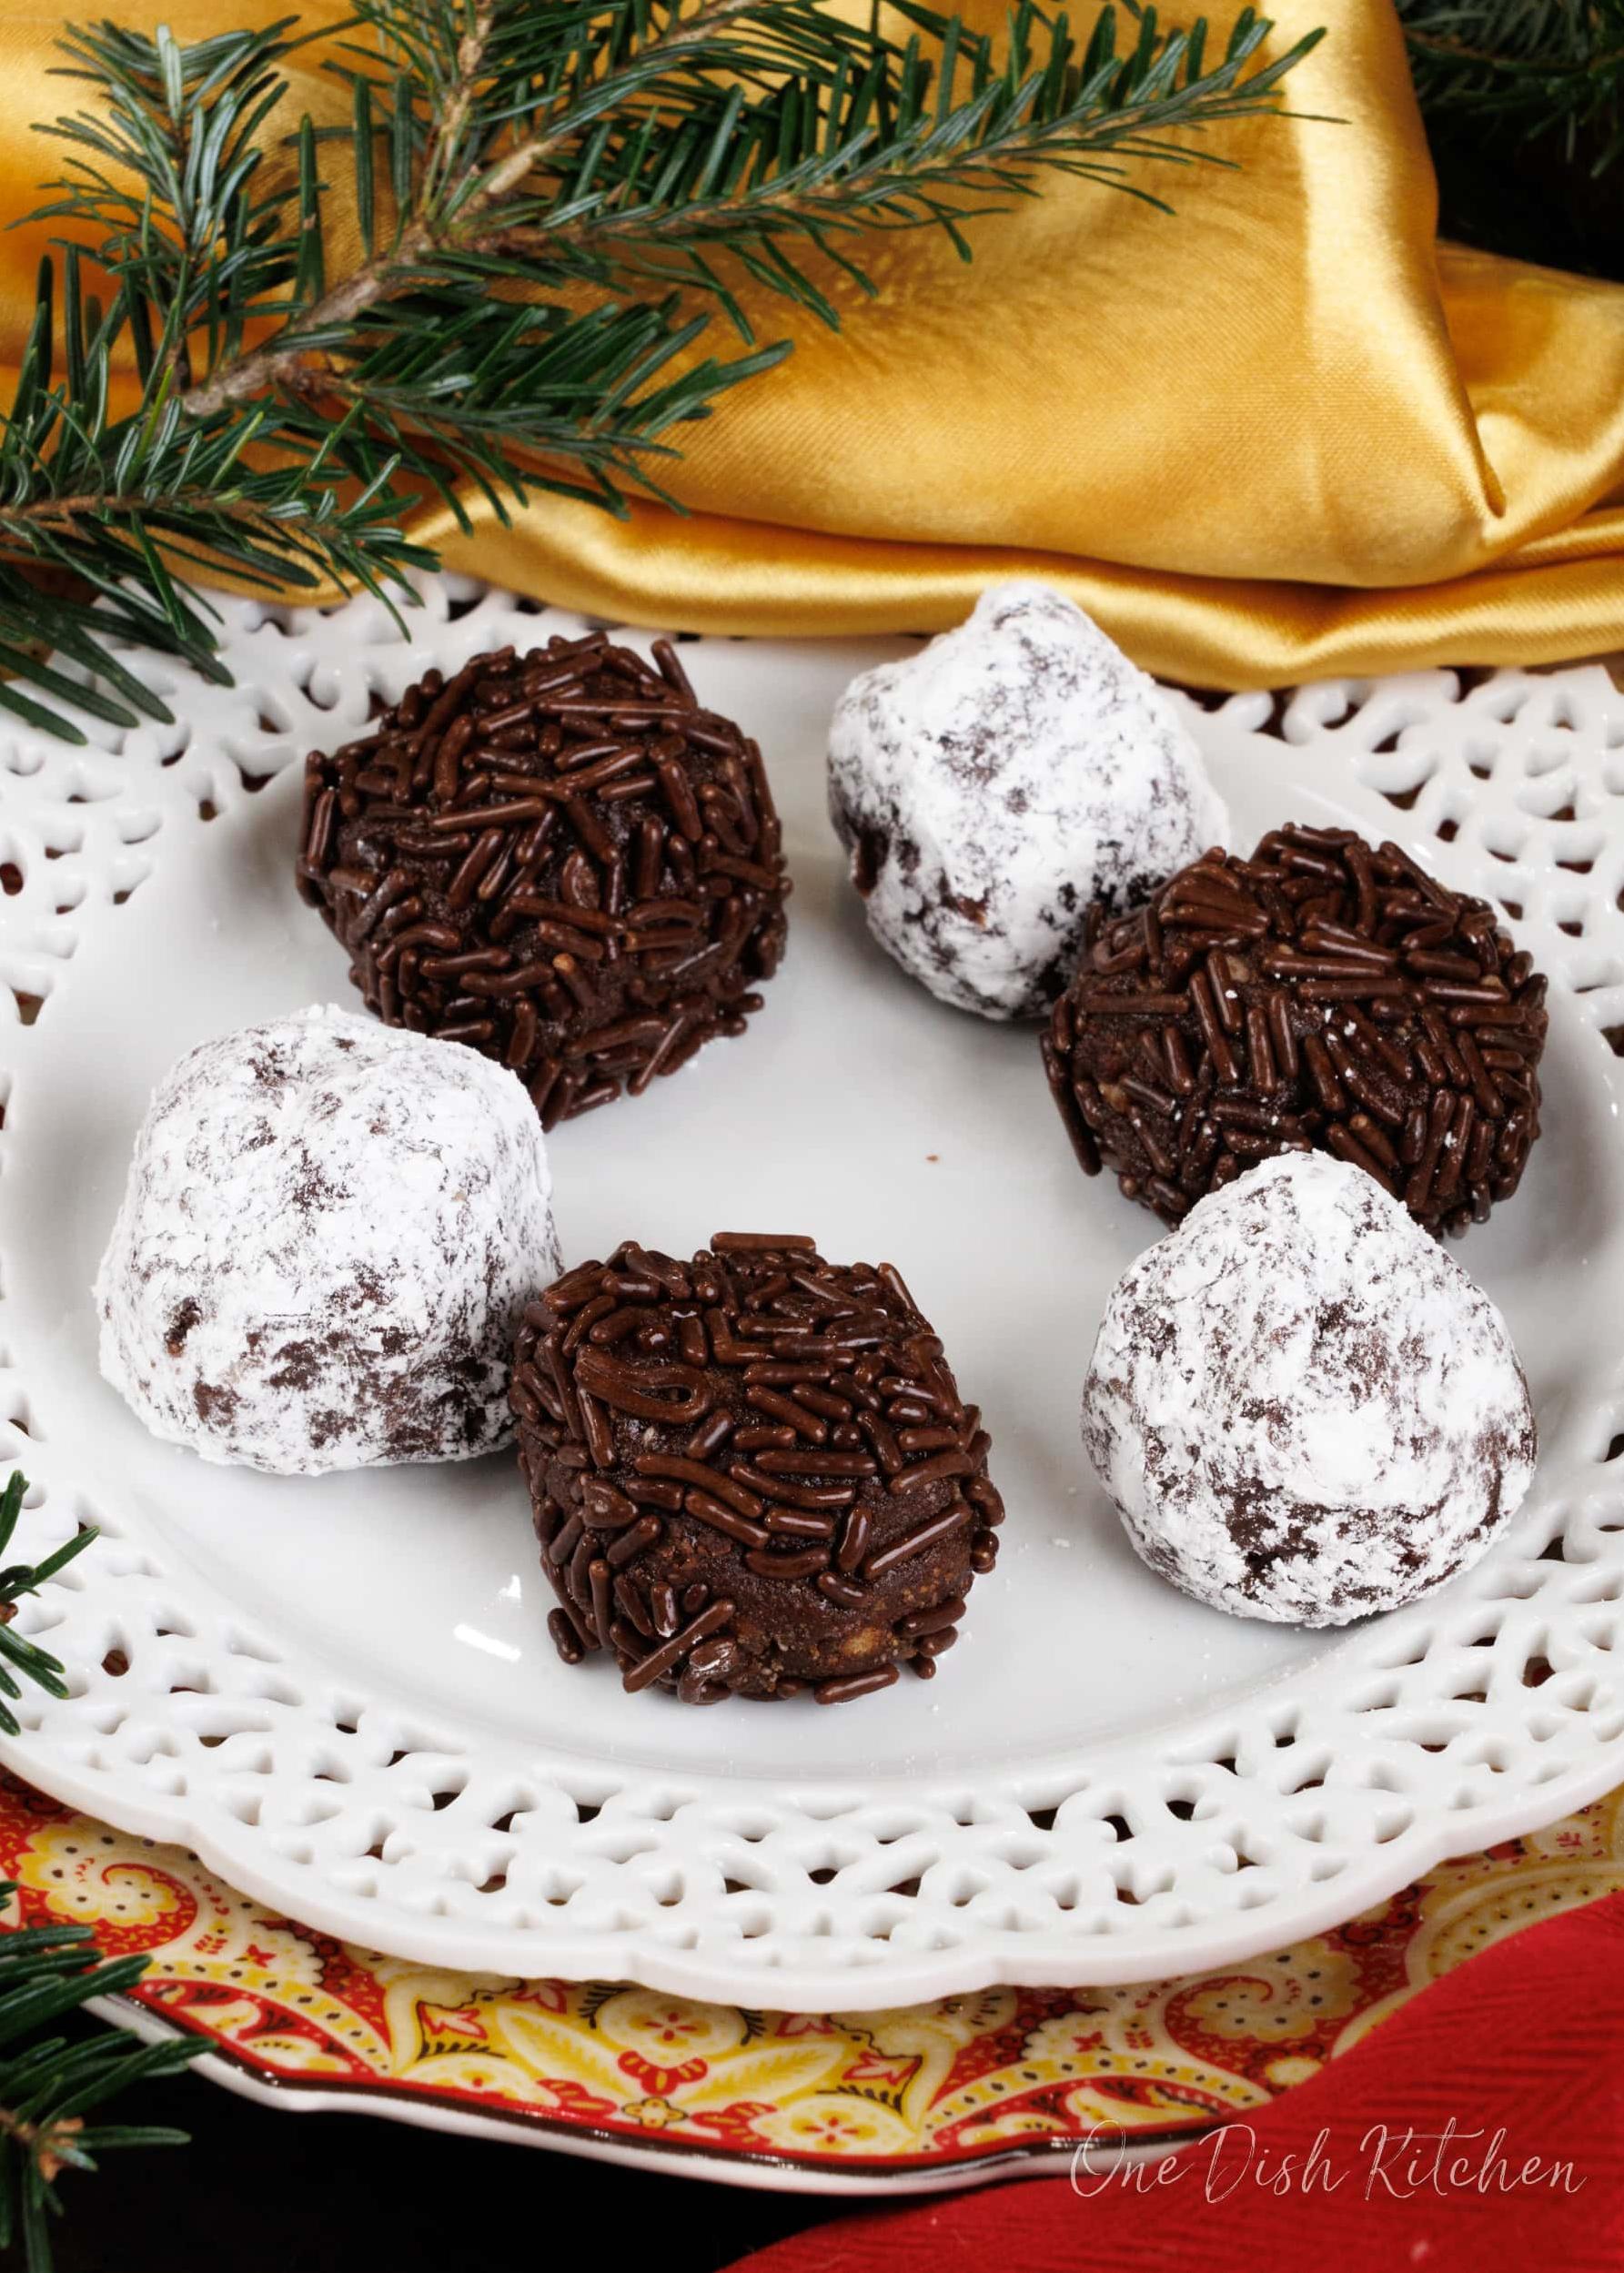  These rum-infused chocolate truffles are the ultimate holiday indulgence.